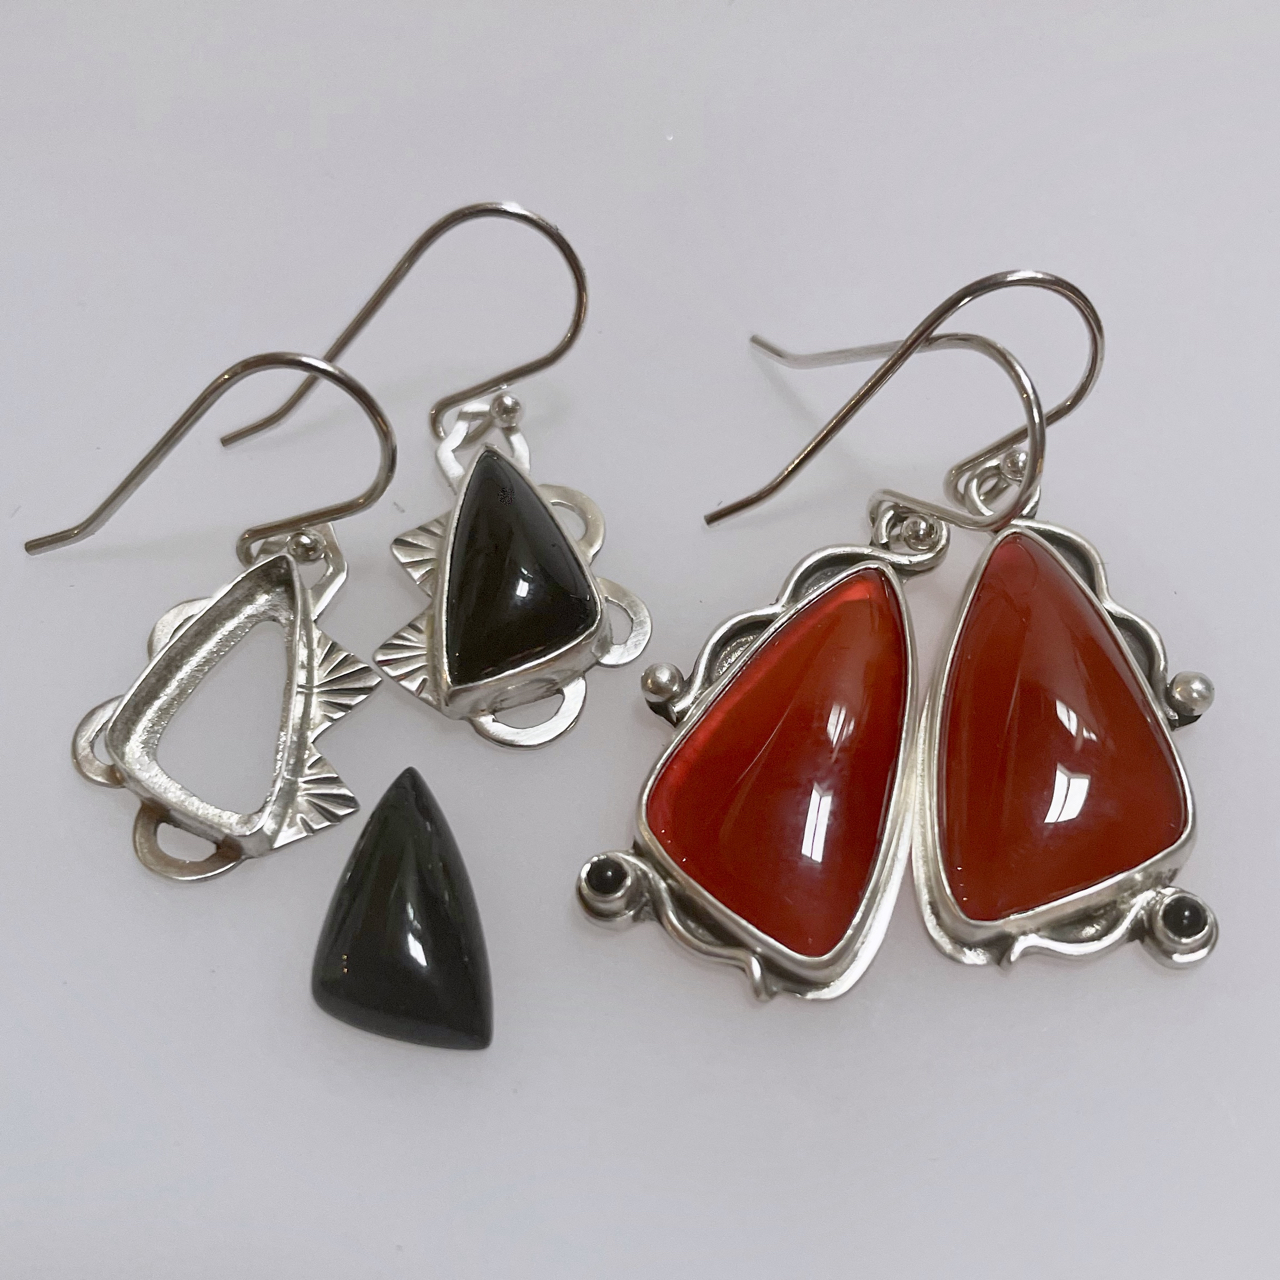 Stone Setting: Bezels 2-Cabochons With Angles - Earrings